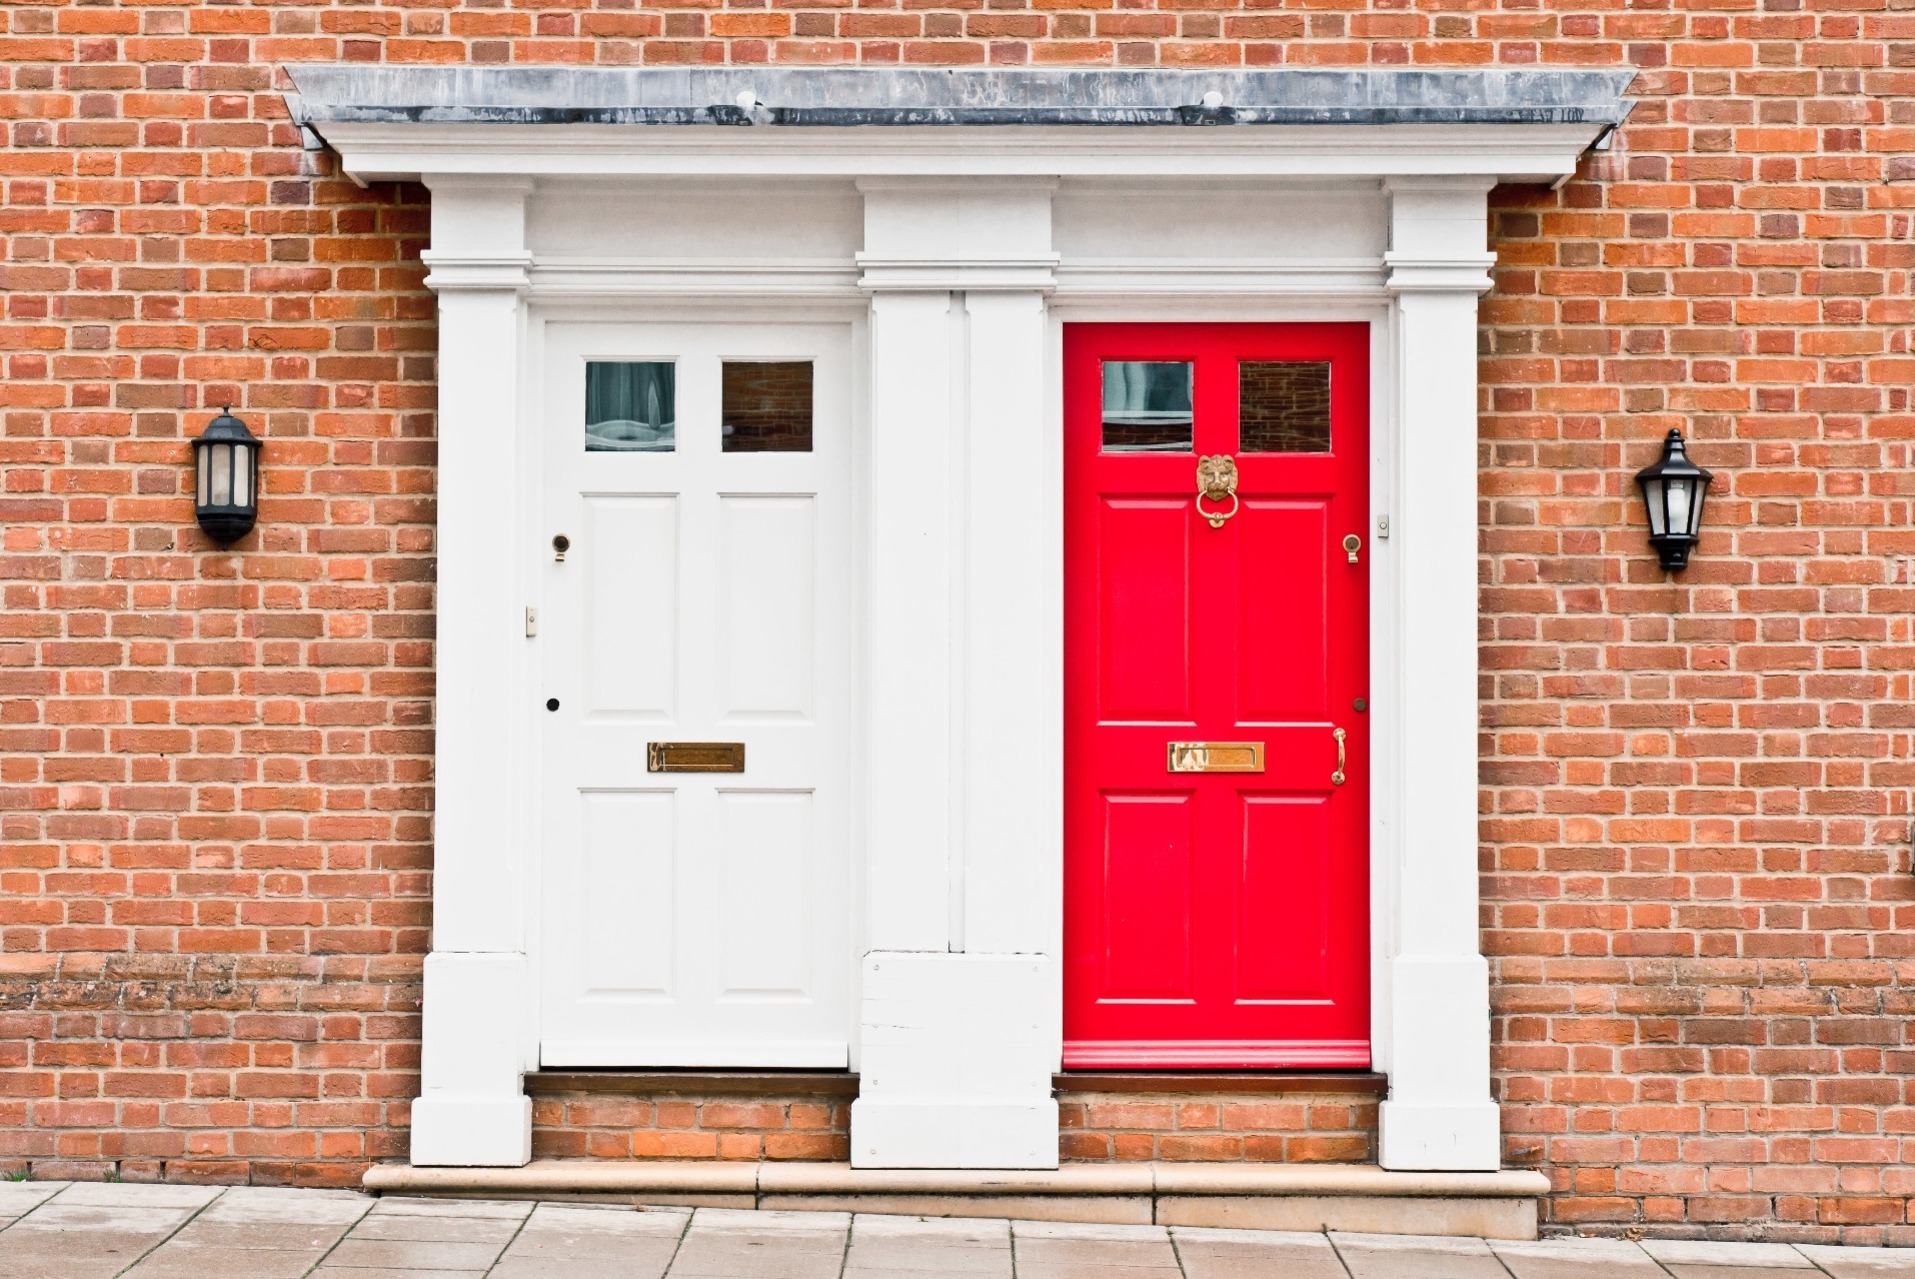 A house with two front doors, one white and one red.